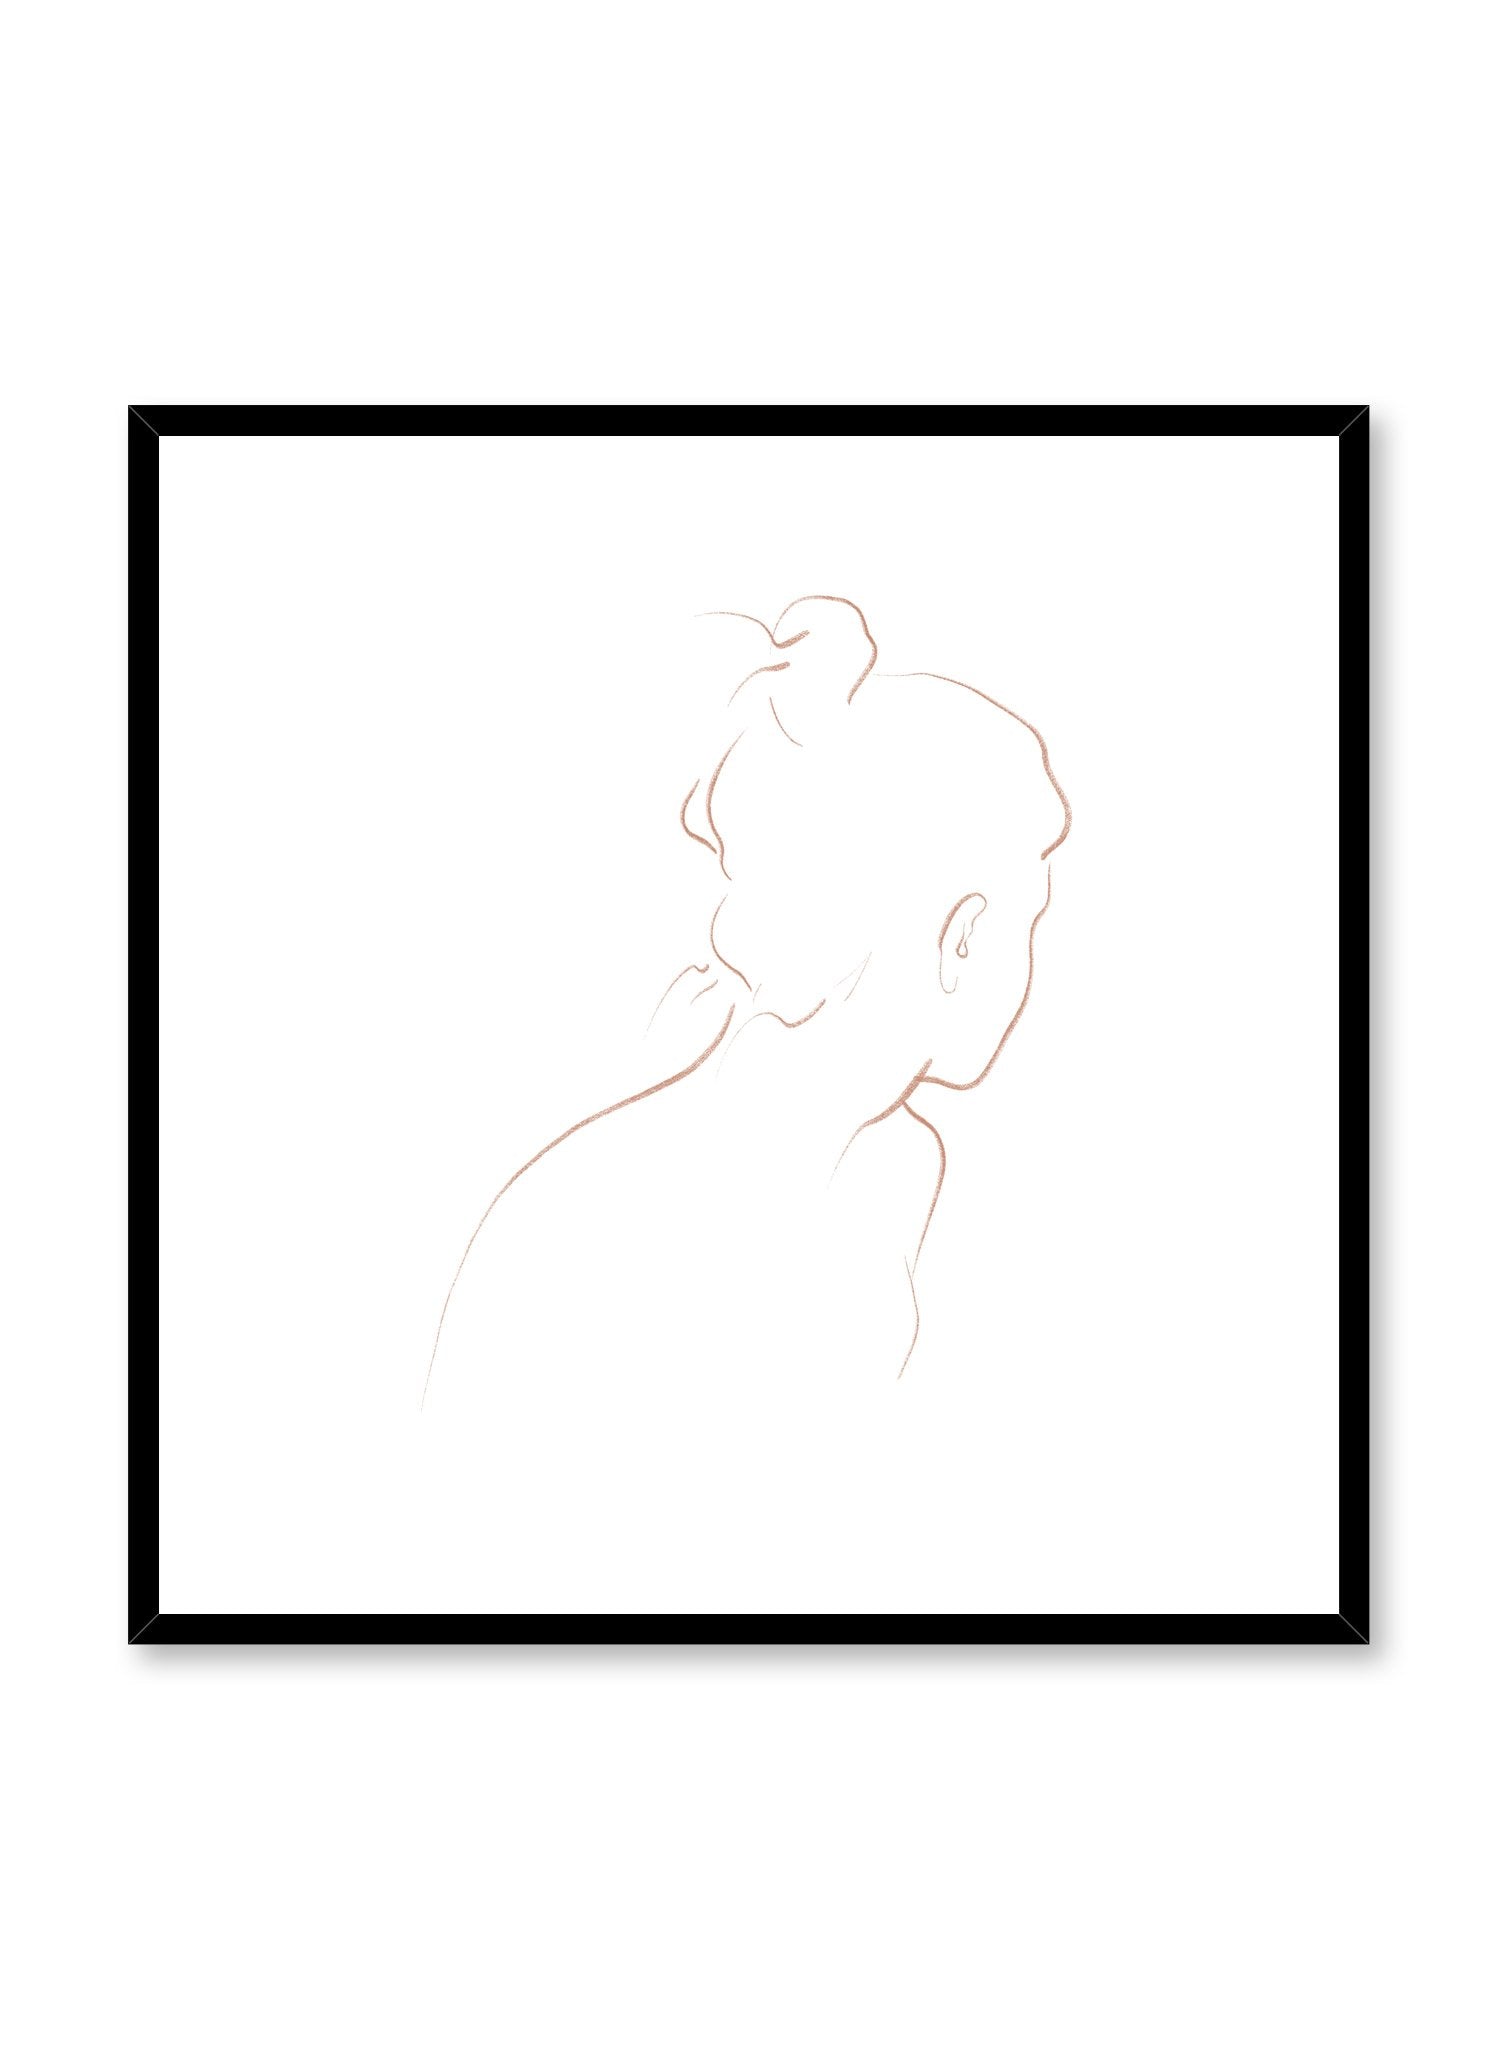 Modern minimalist square poster by Opposite Wall with abstract illustration of Into the Distance with beige line art